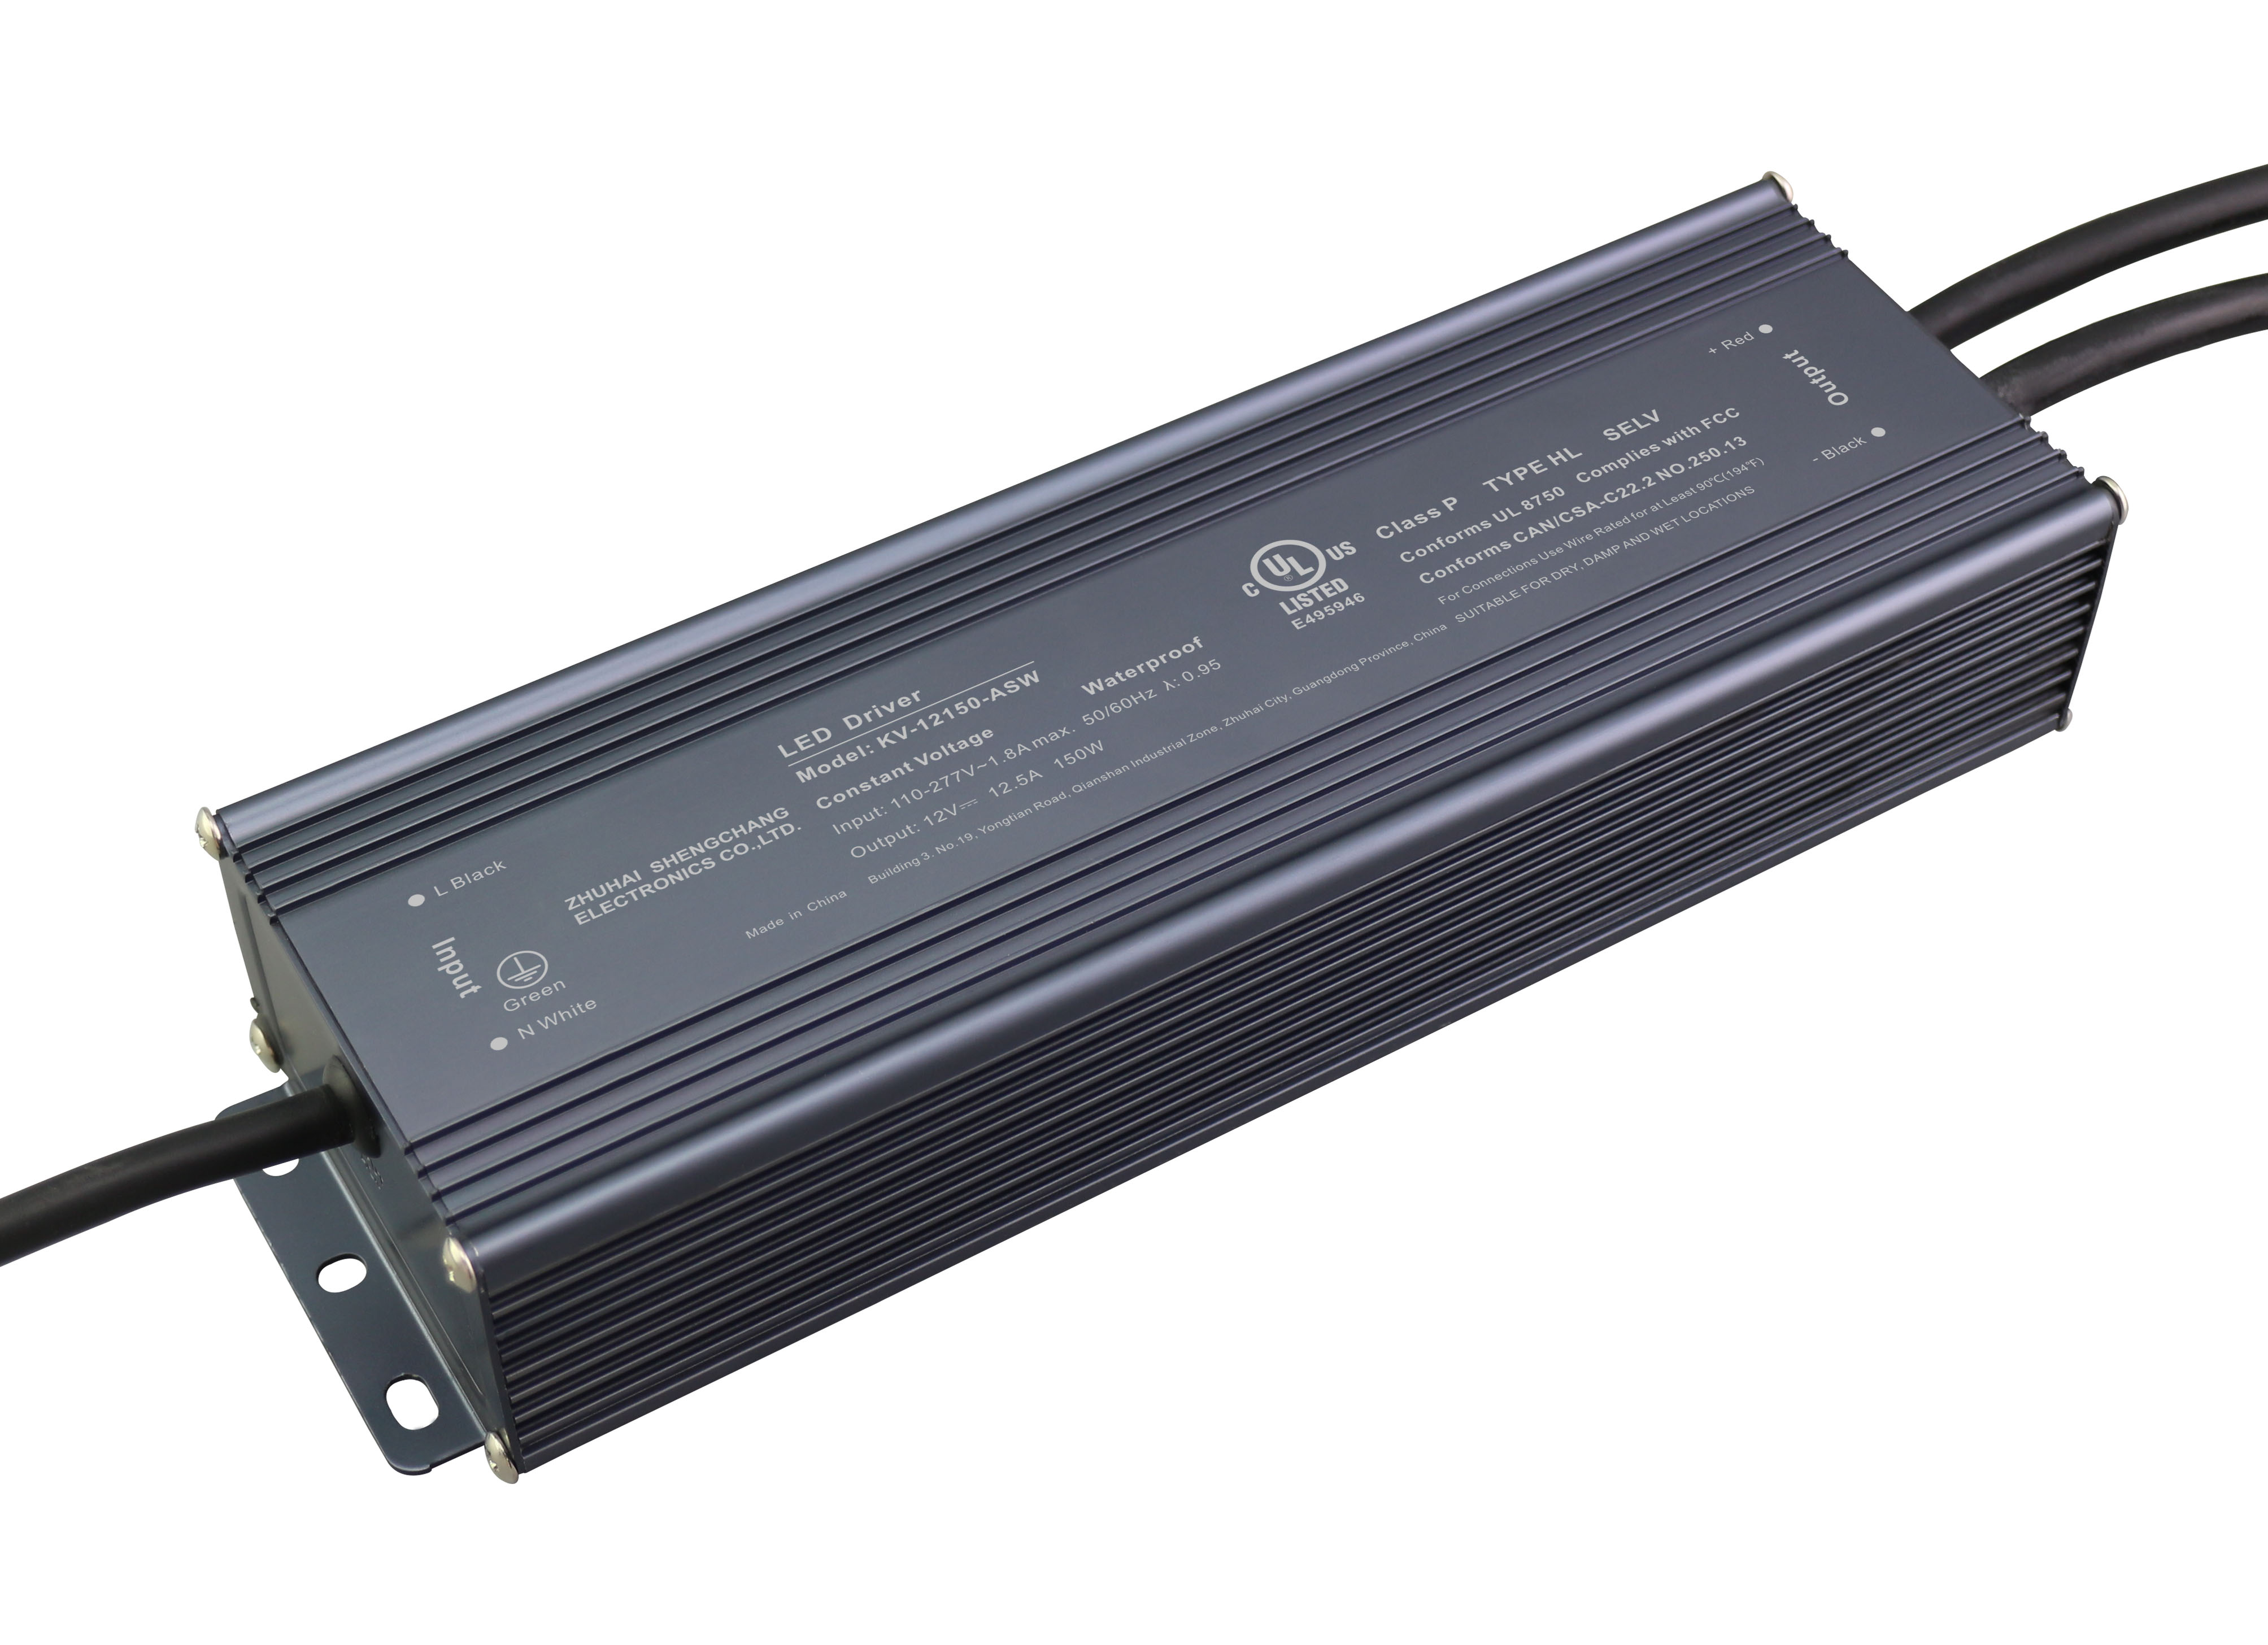 KV-ASW Series 150W Constant Voltage Non-Dimming LED Driver